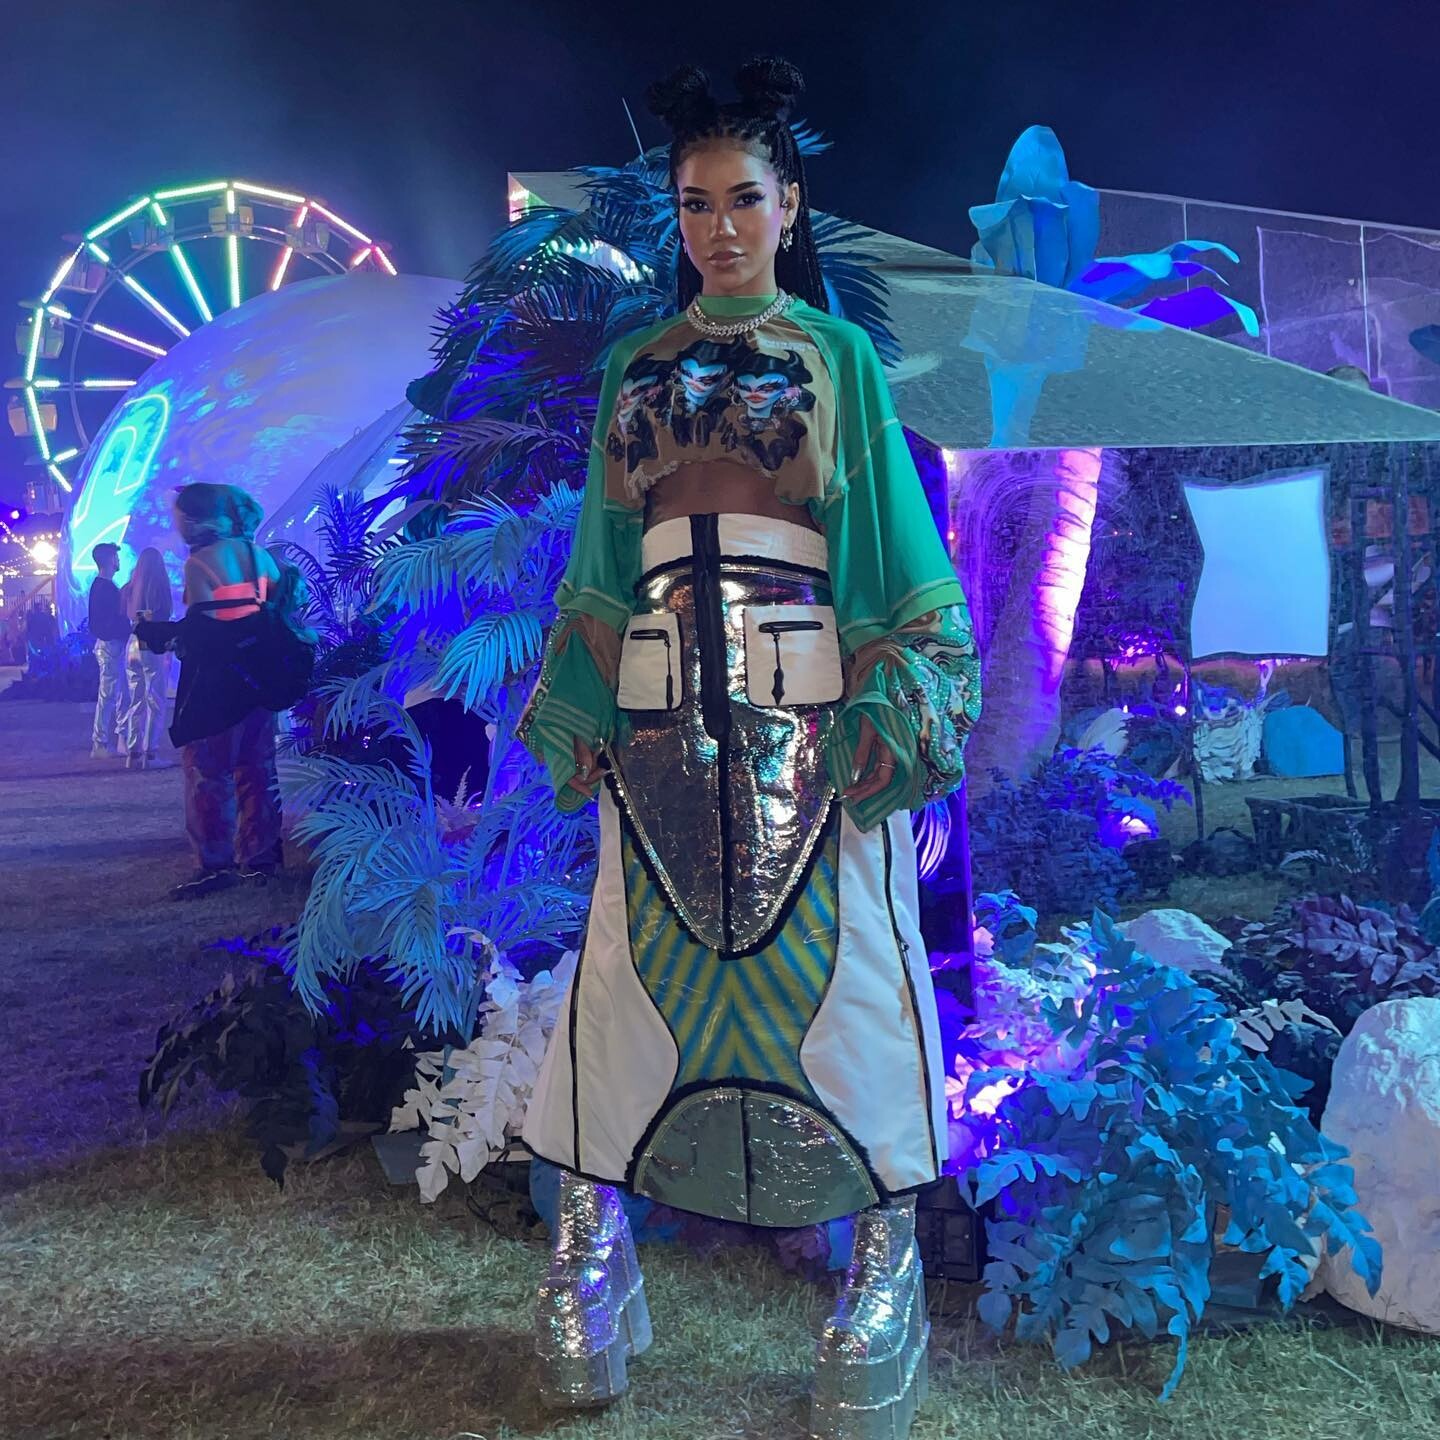 Bringing You All The Outfit Highlights From Coachella Weekend 1